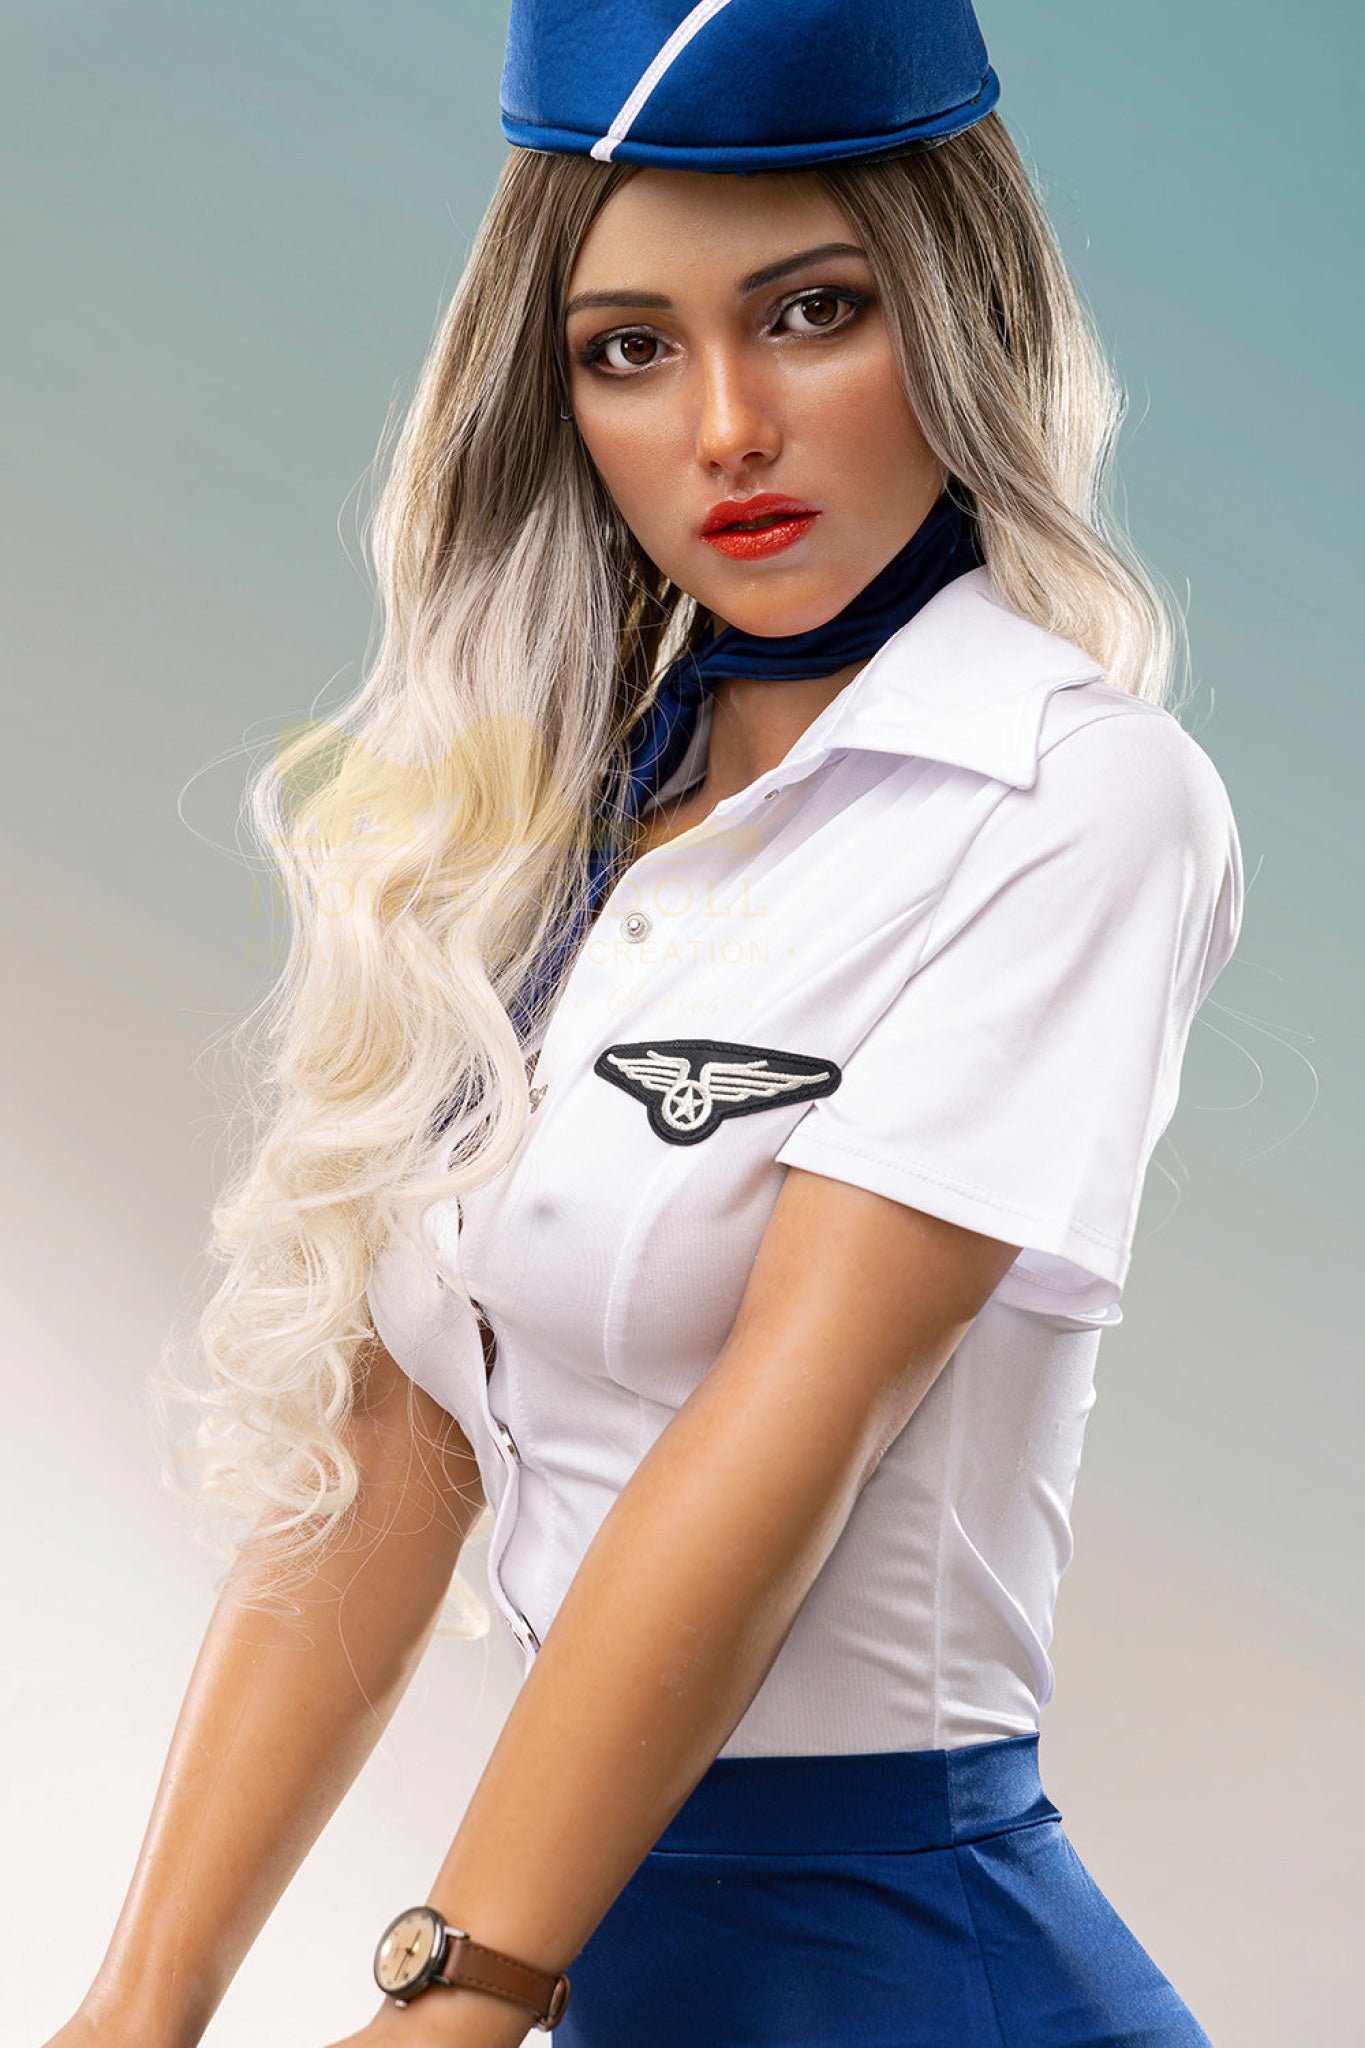 Molly Premium Silicone Love Doll - Super Realistic Series - IronTech Doll Irontech Doll®